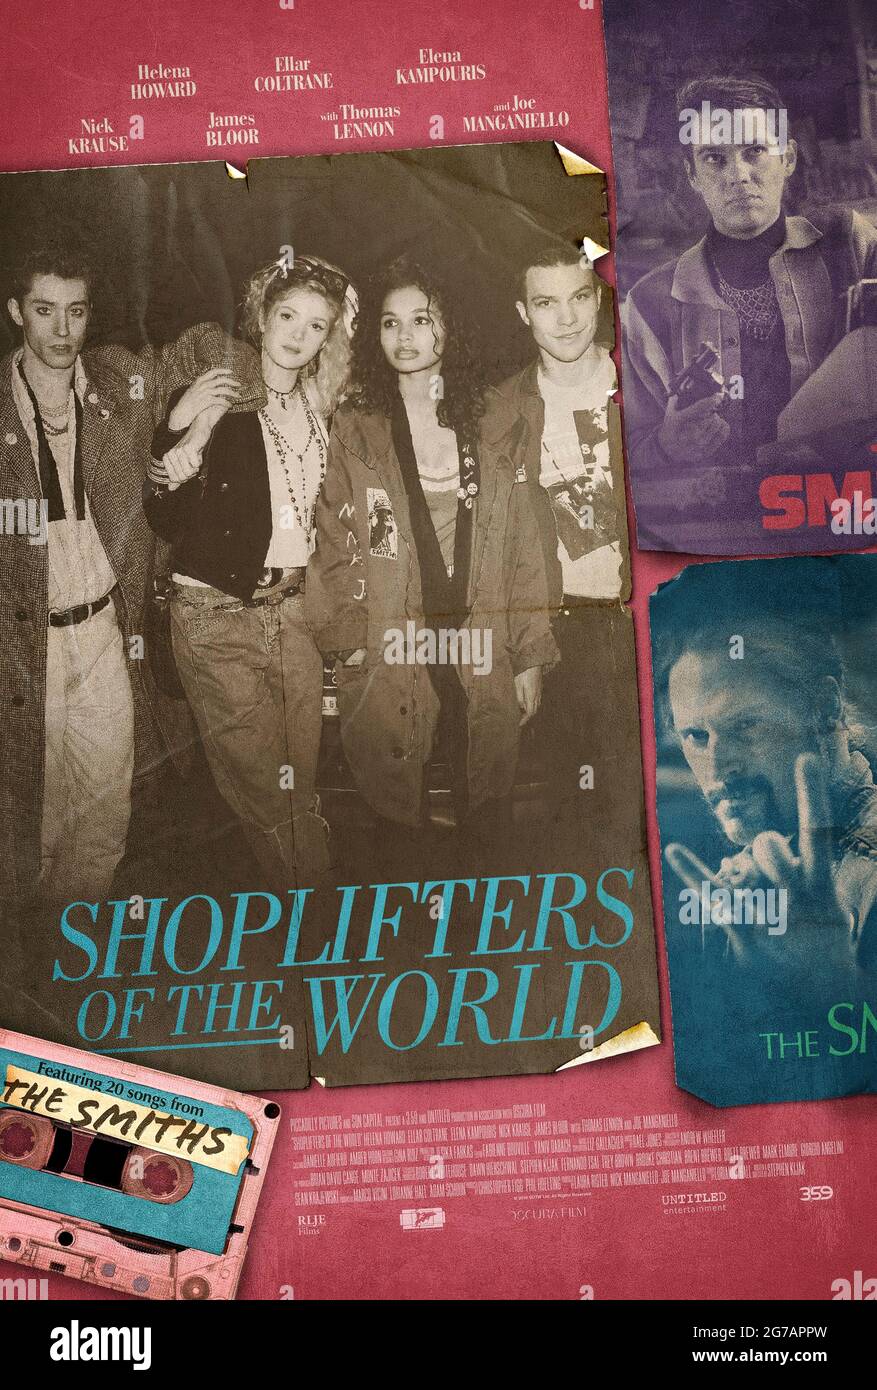 Shoplifters of the World (2021) directed by Stephen Kijak and starring Helena Howard, Ellar Coltrane and Elena Kampouris. Four friends come to terms with the sudden demise of iconic British band The Smiths. Stock Photo